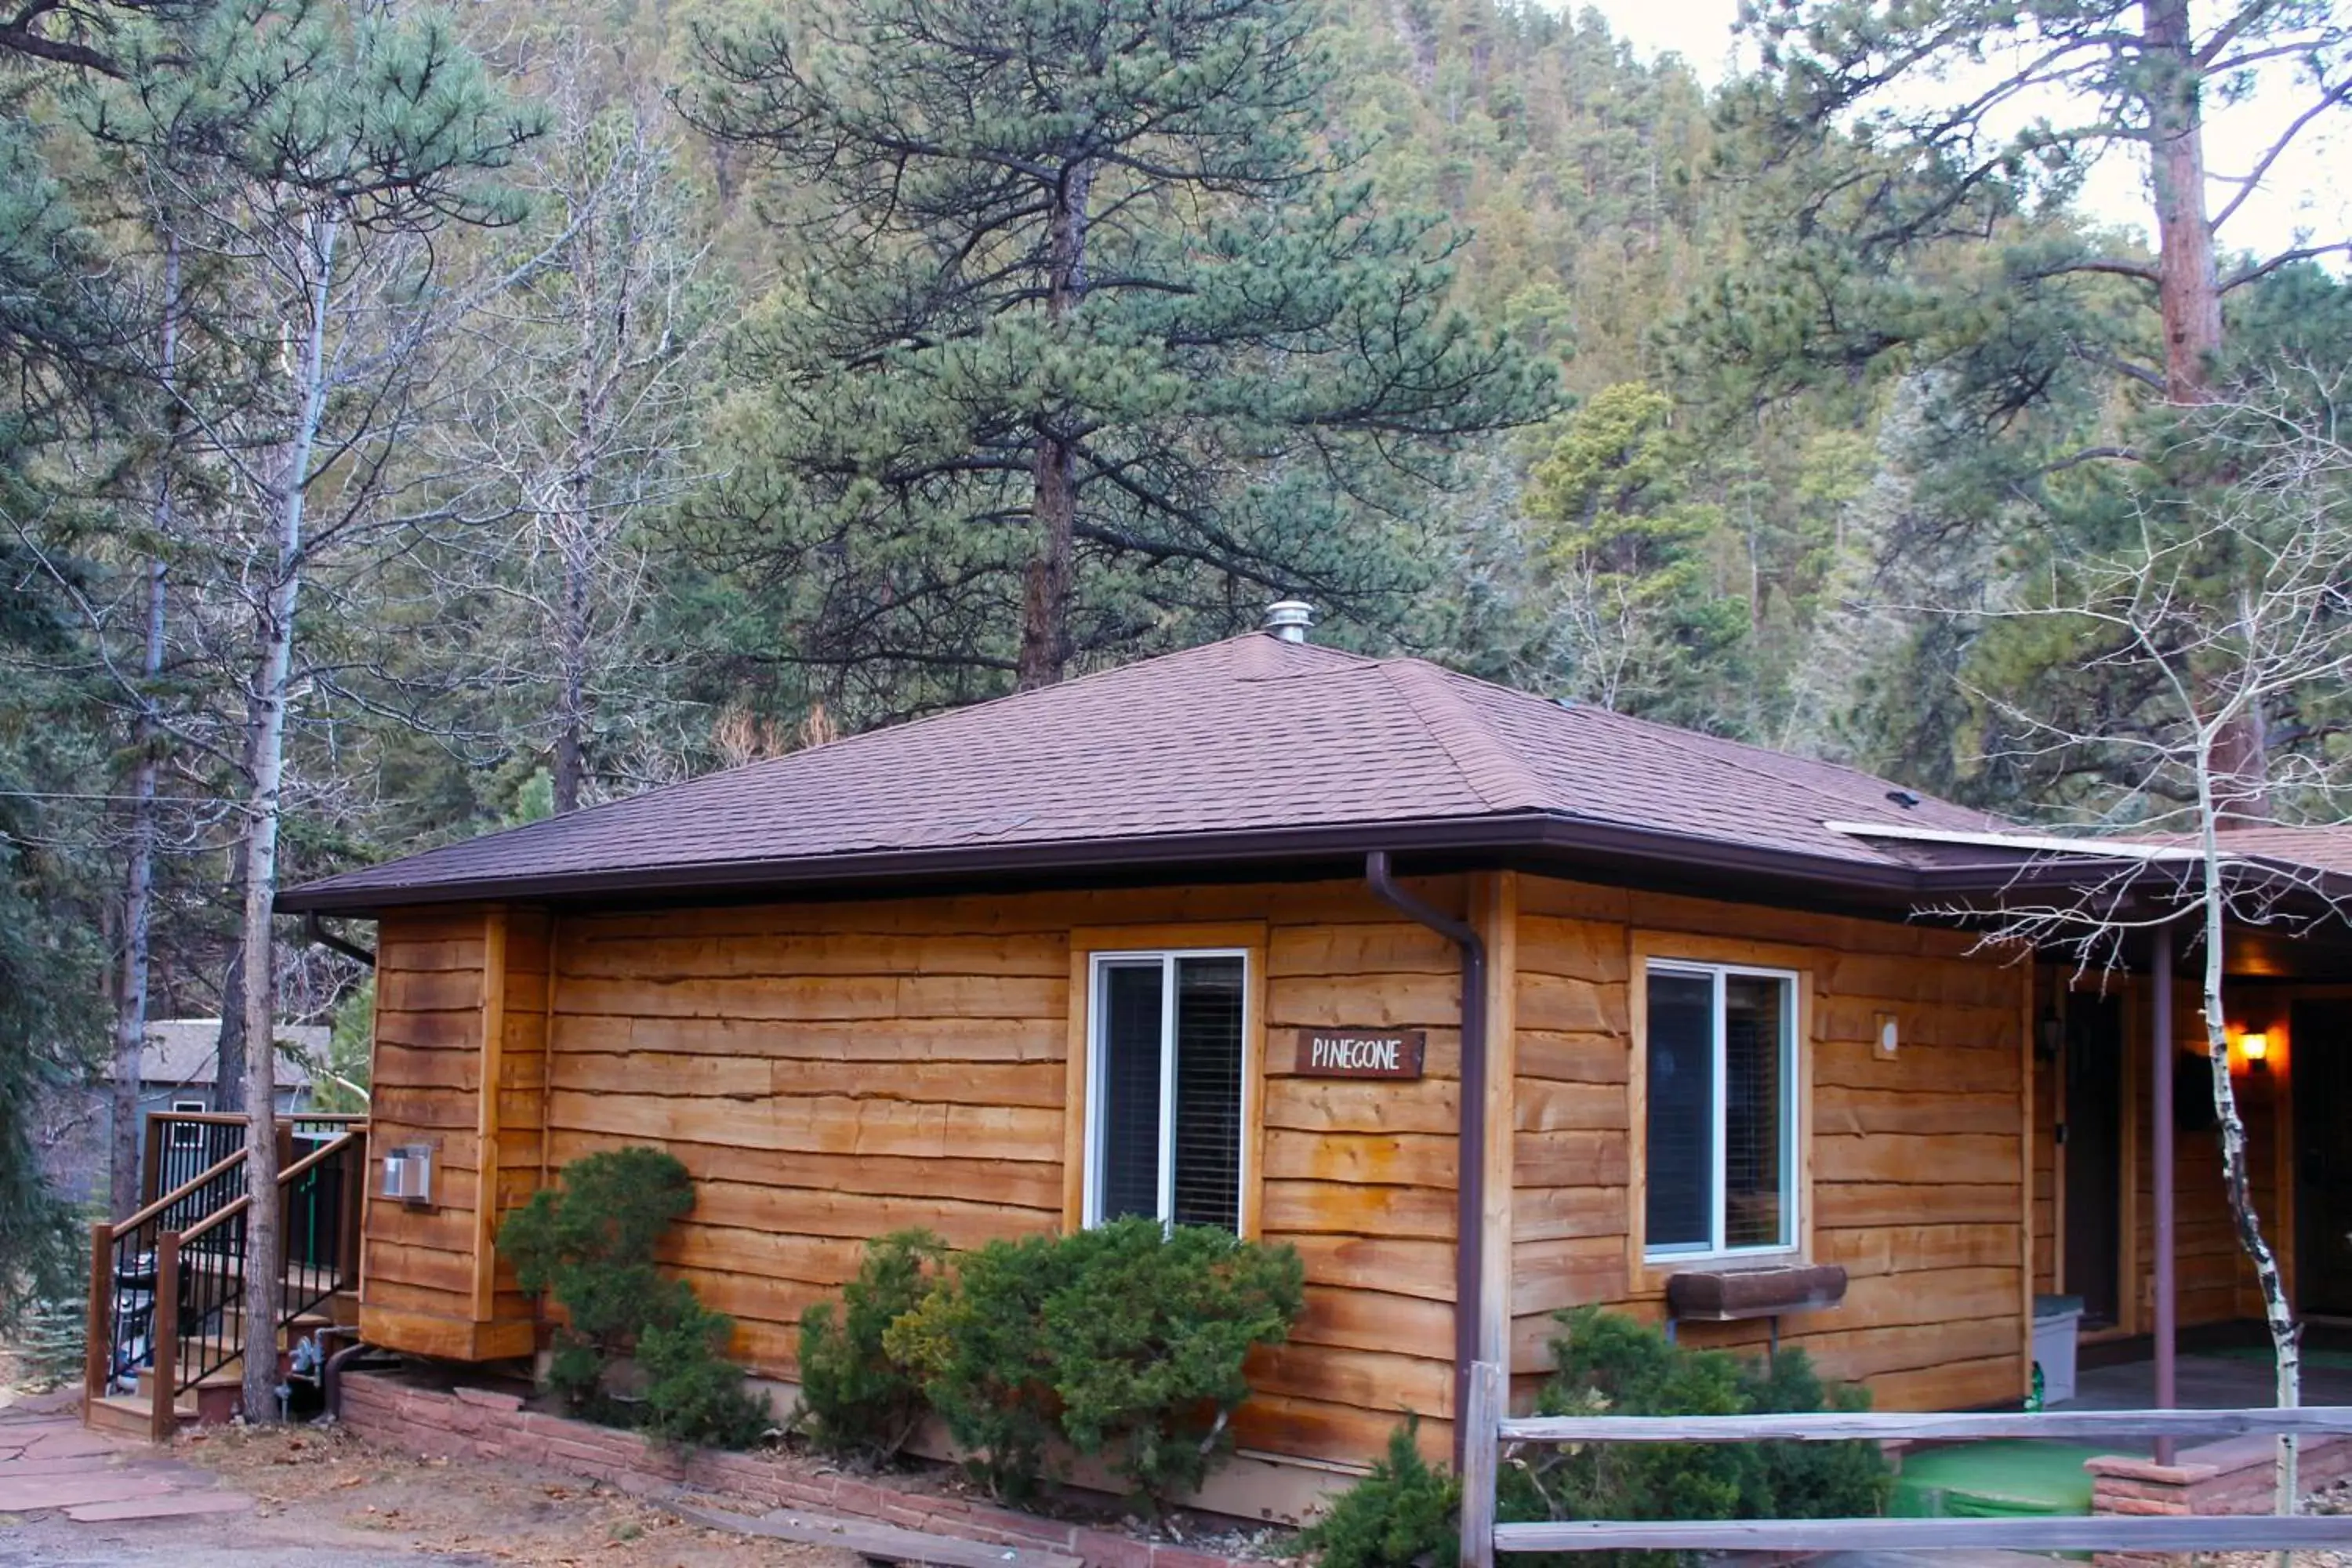 Property Building in The Inn on Fall River & Fall River Cabins